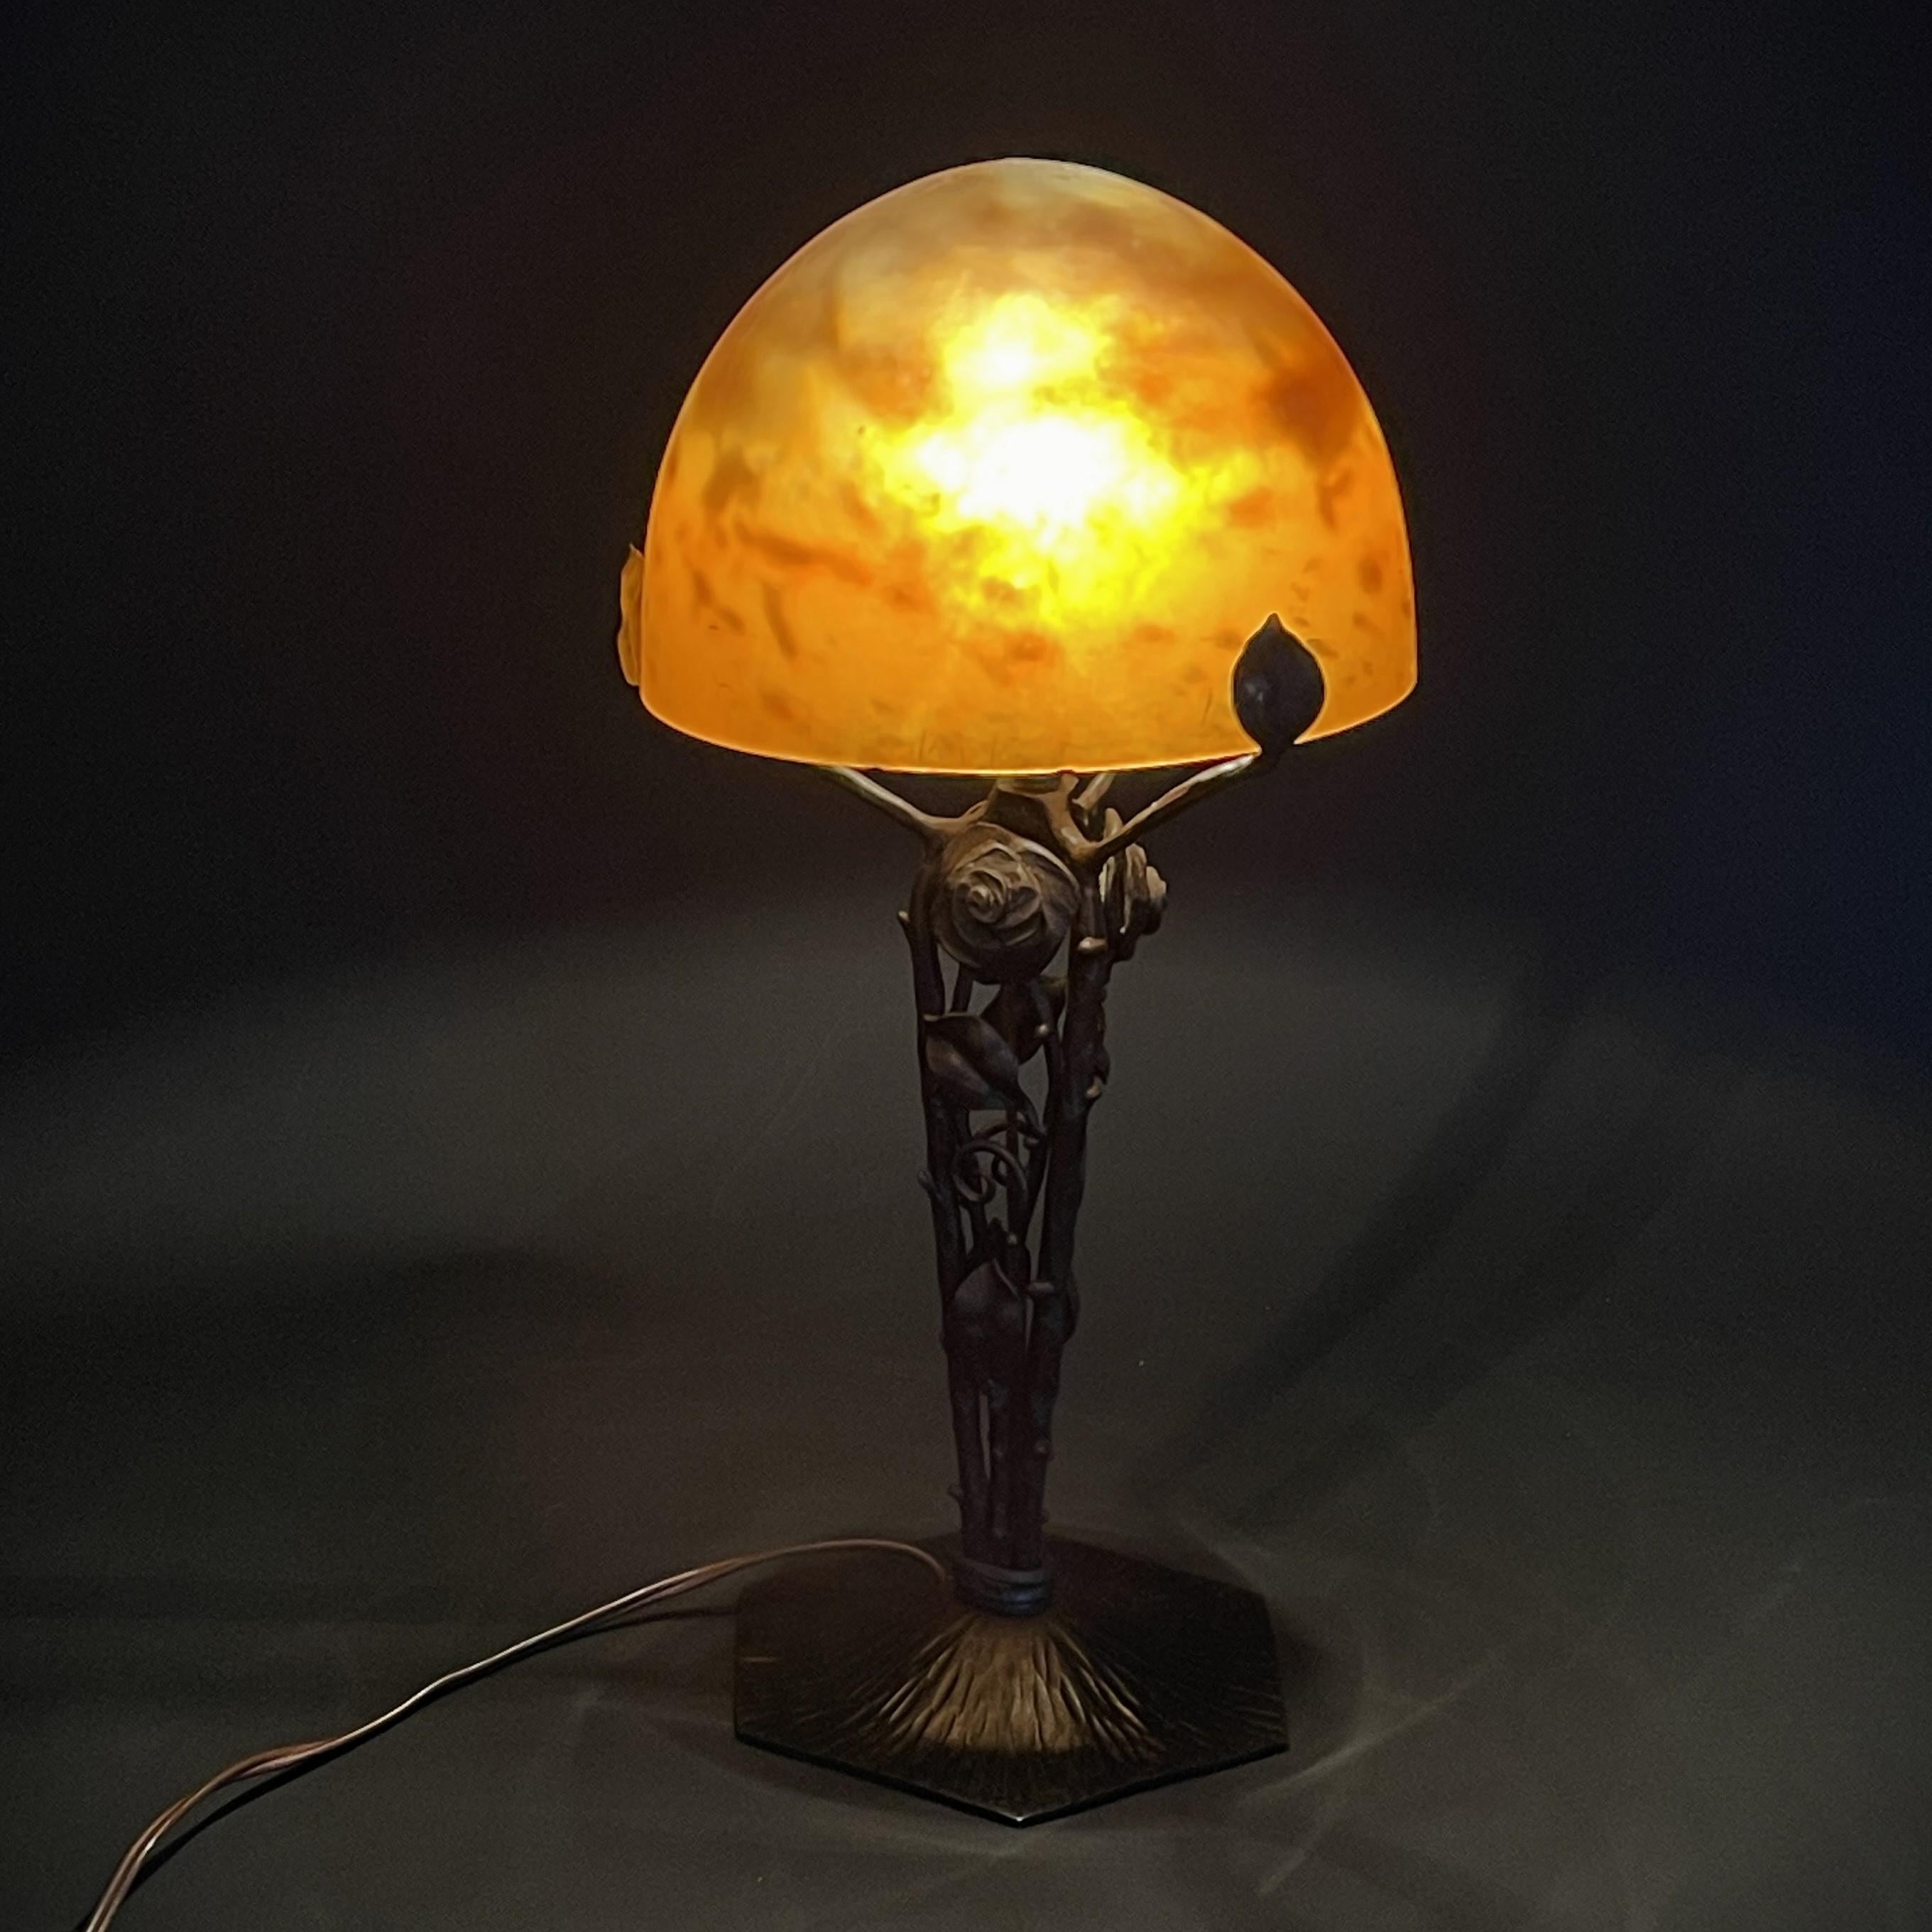 Art Deco desk lamp by DAUM - 1930s.

The rare Daum Nancy ART DECO ceiling lamp is a fascinating example of the masterful craftsmanship and exquisite design of this renowned French glass manufacturer. This signed table lamp skilfully combines the